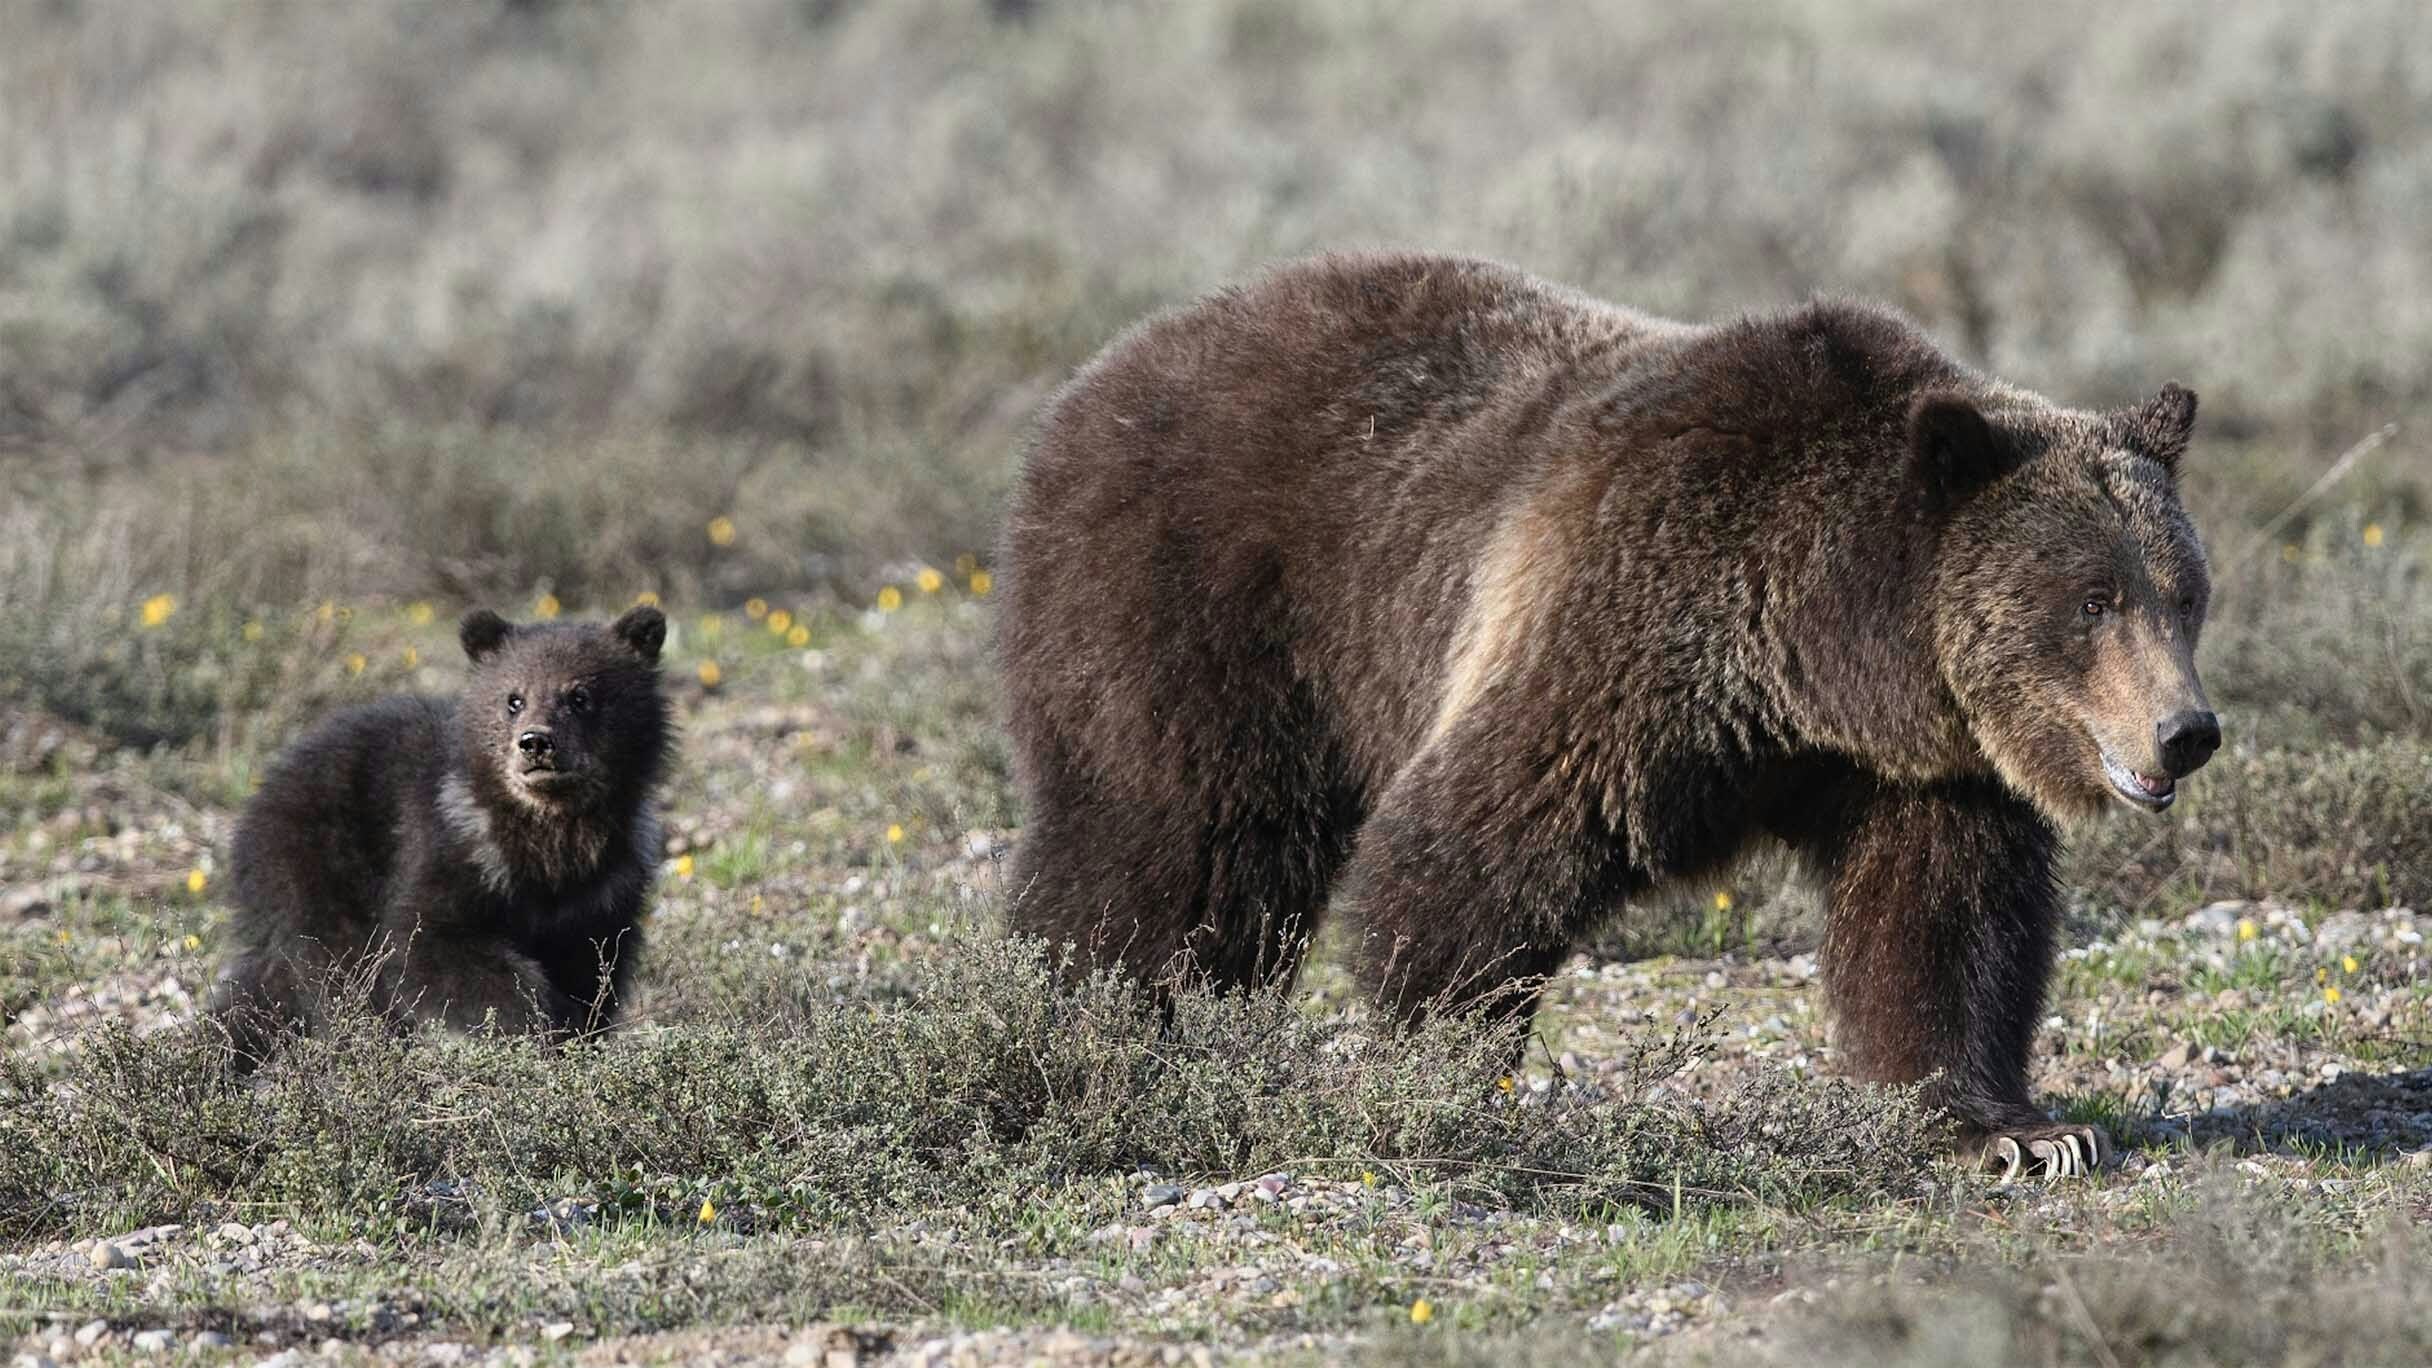 Grizzly 399 and her 2023 cub were spotted for the first time this year May 16. (Photo is owned by Jorn Vangoidtsenhoven and may not be reproduced)